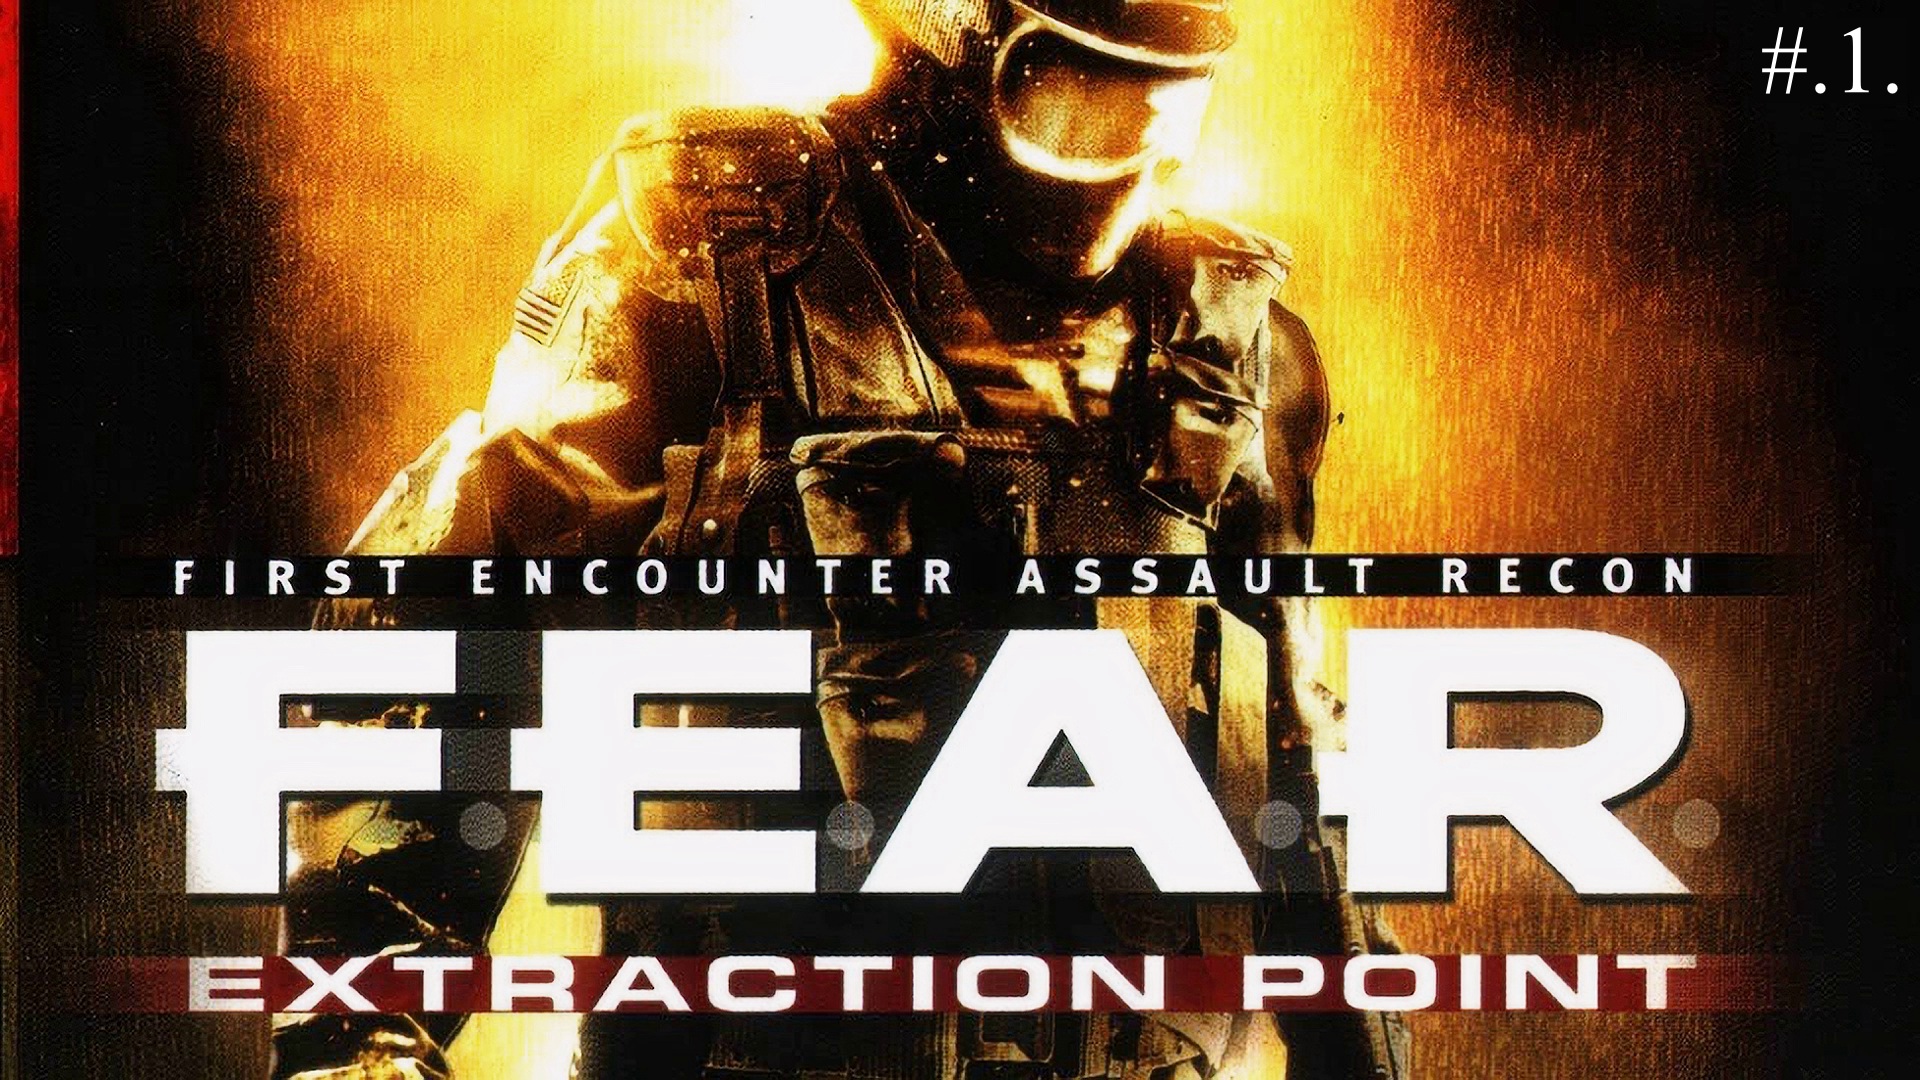 F e p s. F.E.A.R. Extraction point обложка. F.E.A.R. Extraction point и f.e.a.r. Perseus mandate. Fear Extraction point обложка.